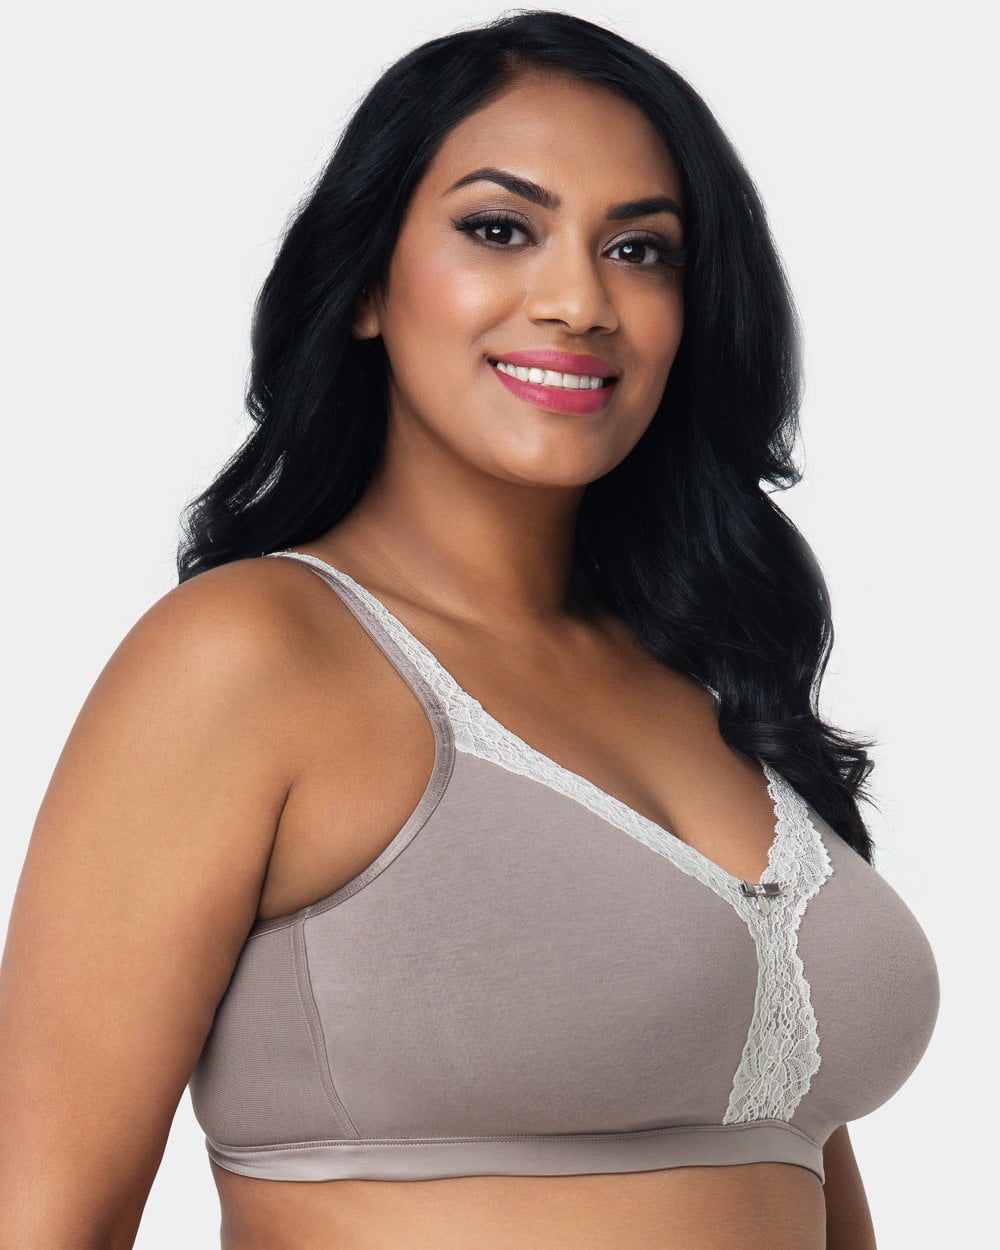 Curvy Couture Full Figure Cotton Luxe Unlined Wire Free Bra Natural 38DDD